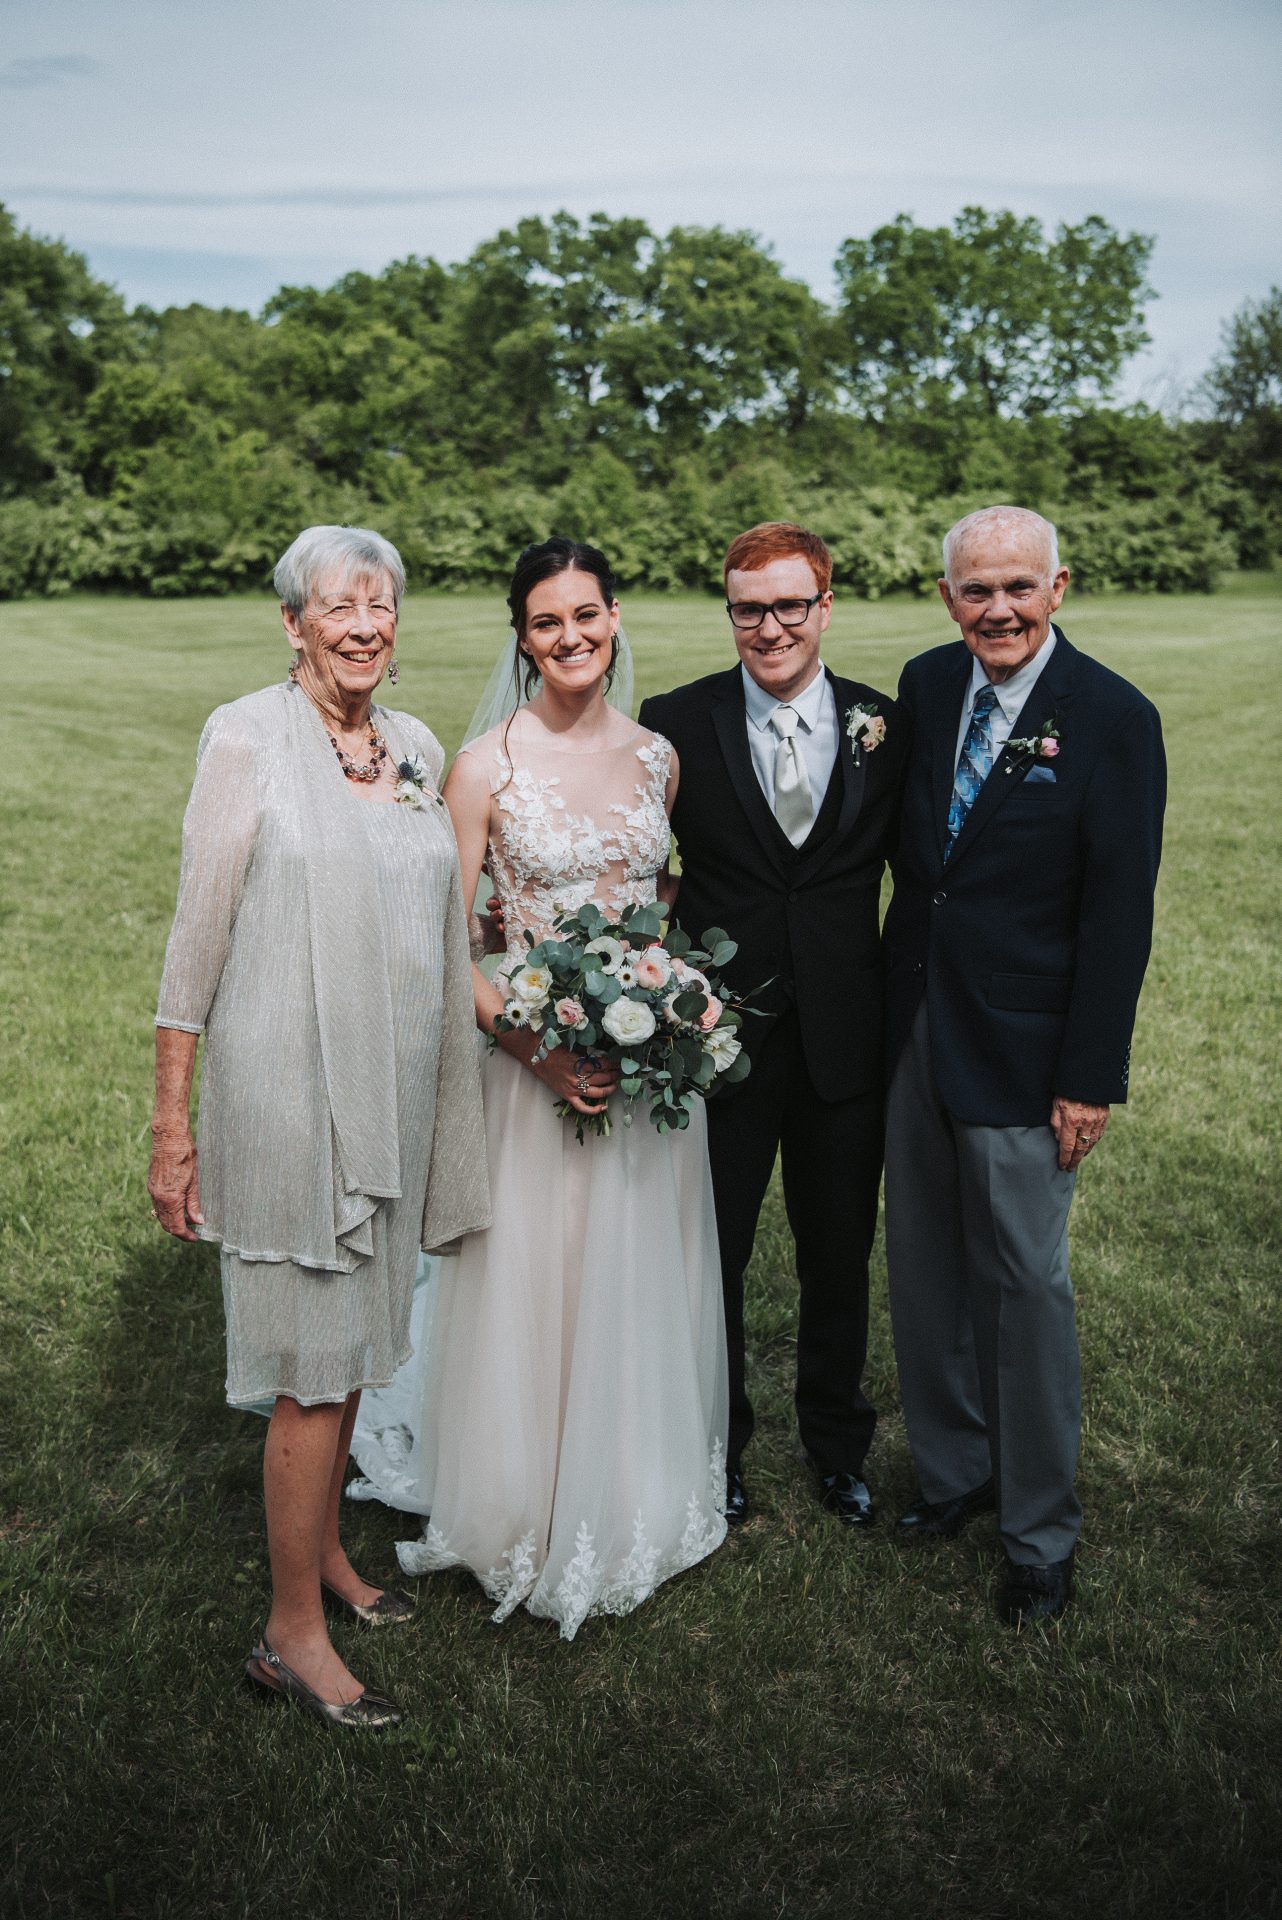 Grandma and Grandpa and my (Emily Allgire) and Colton Allgire's wedding. It is a memory I'll cherish forever and am so grateful he was able to make it.